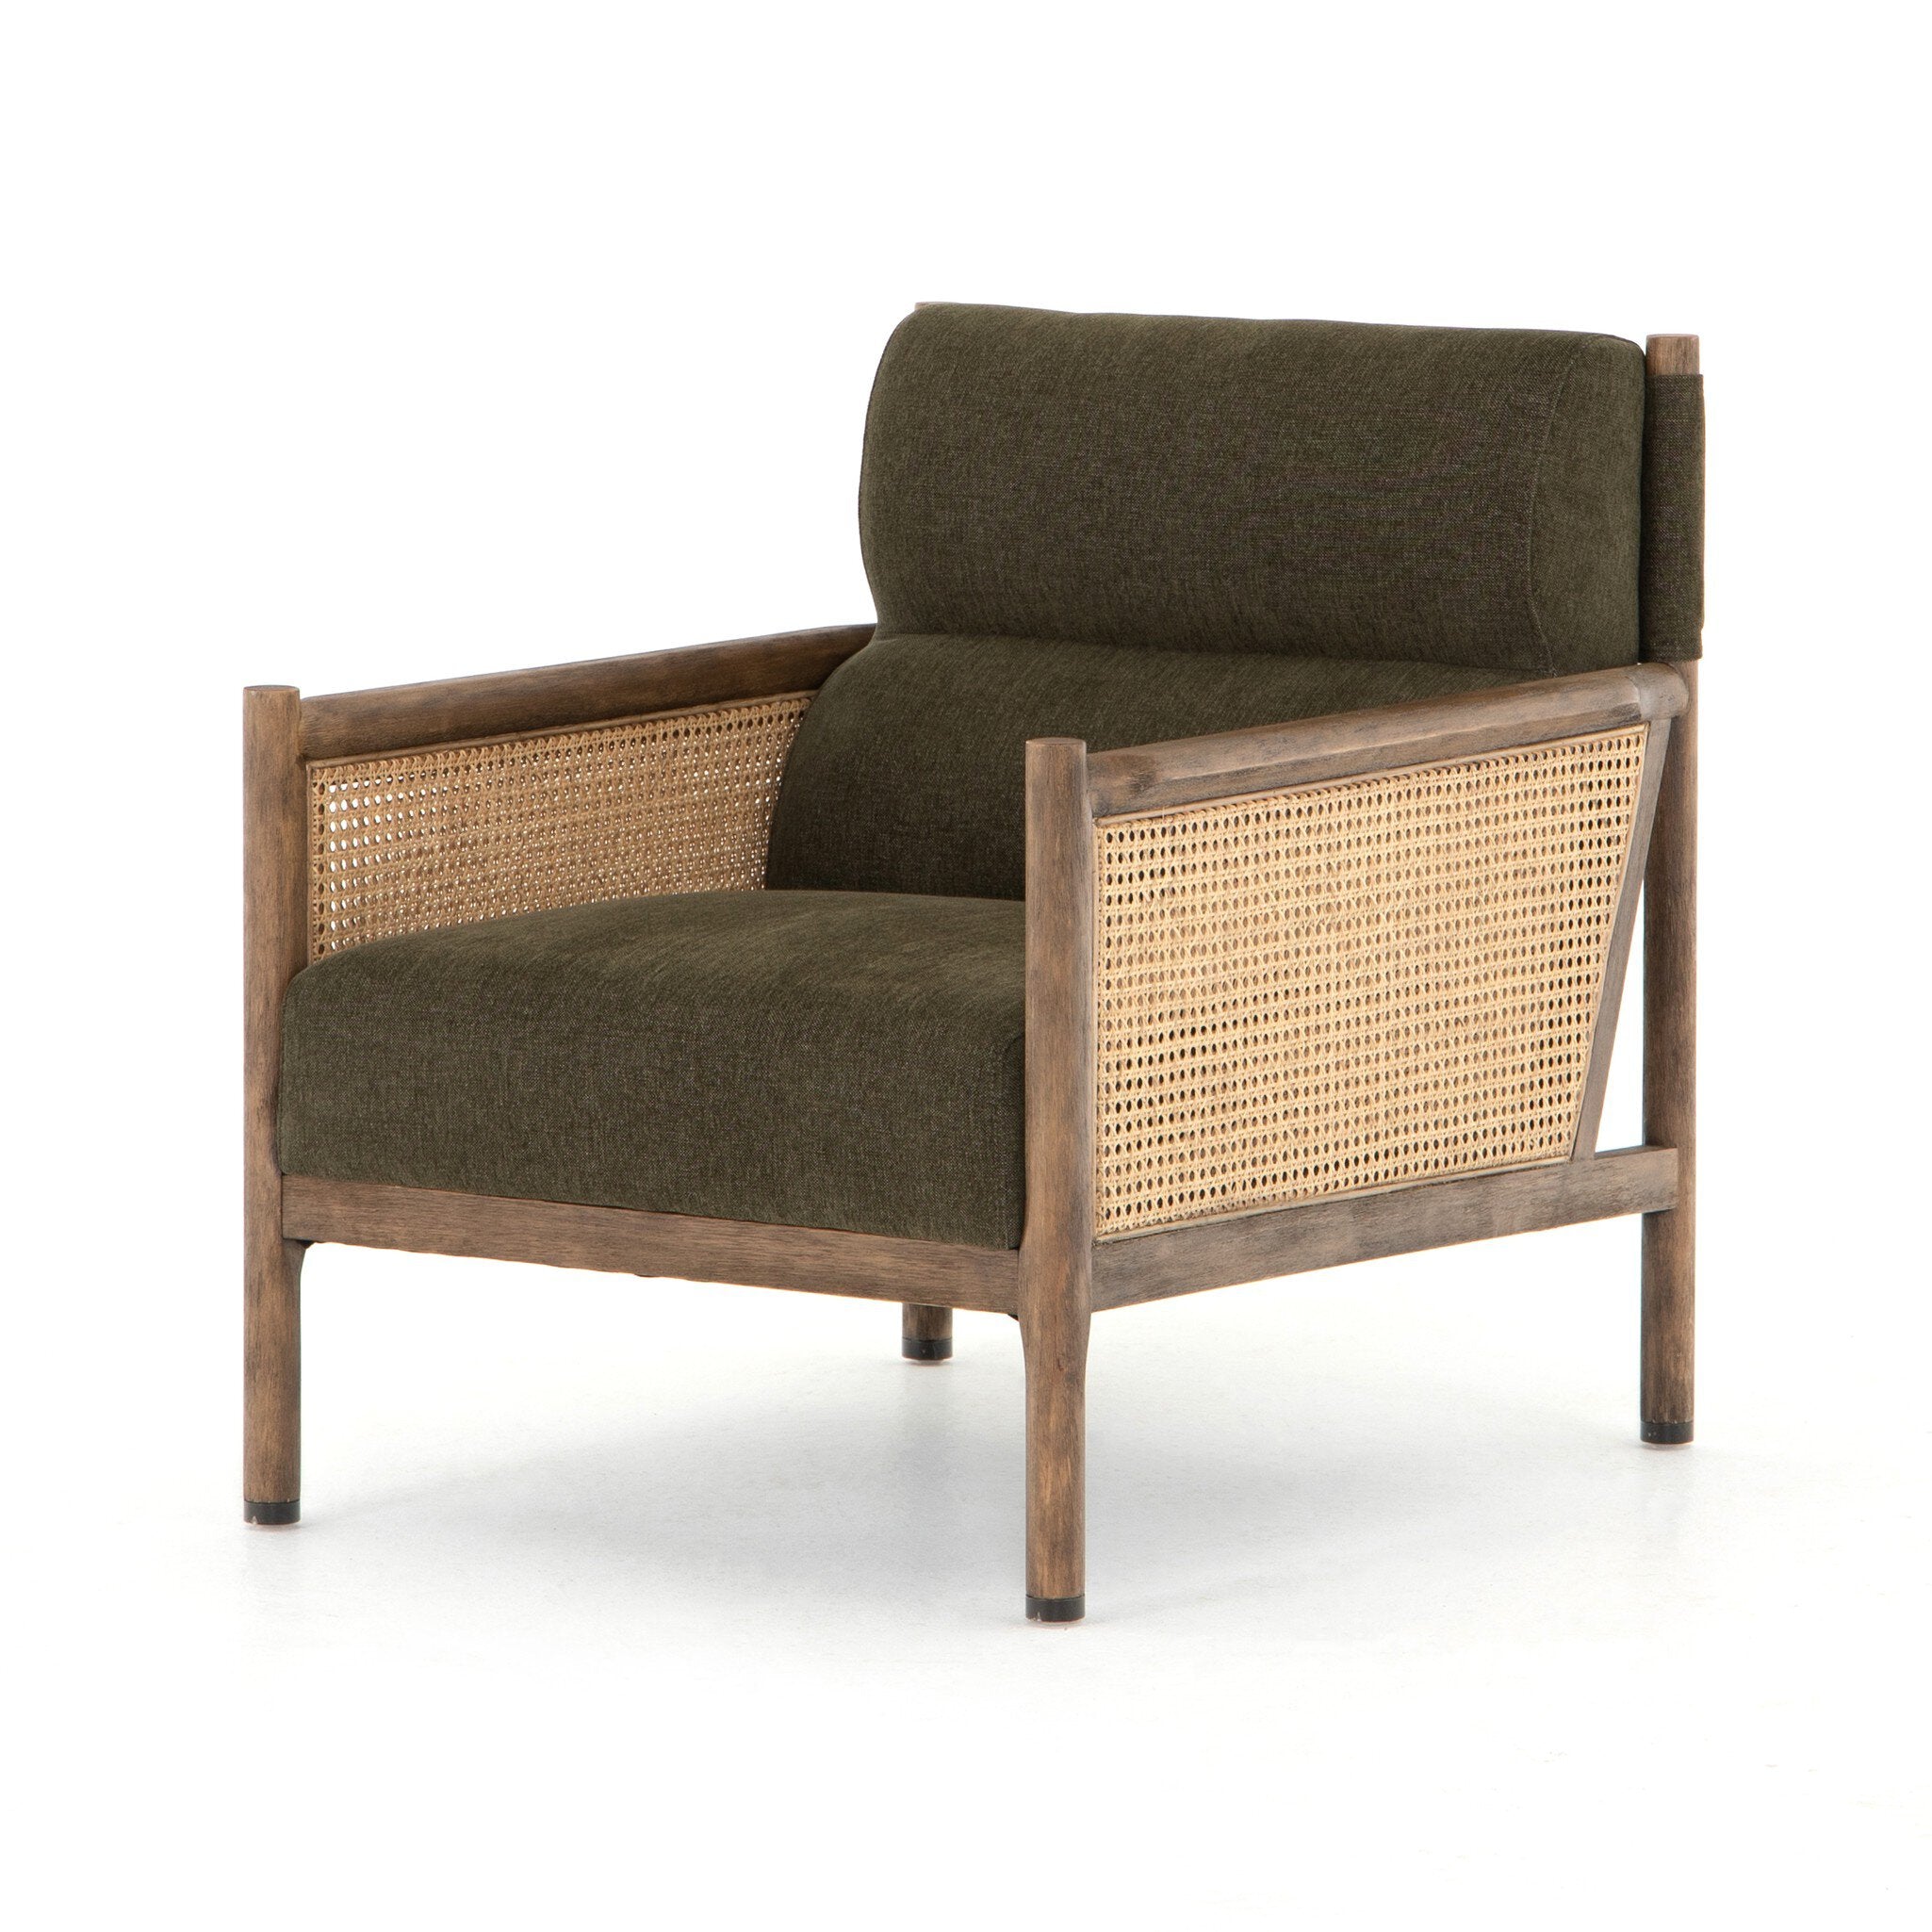 Kempsey Chair - Sutton Olive